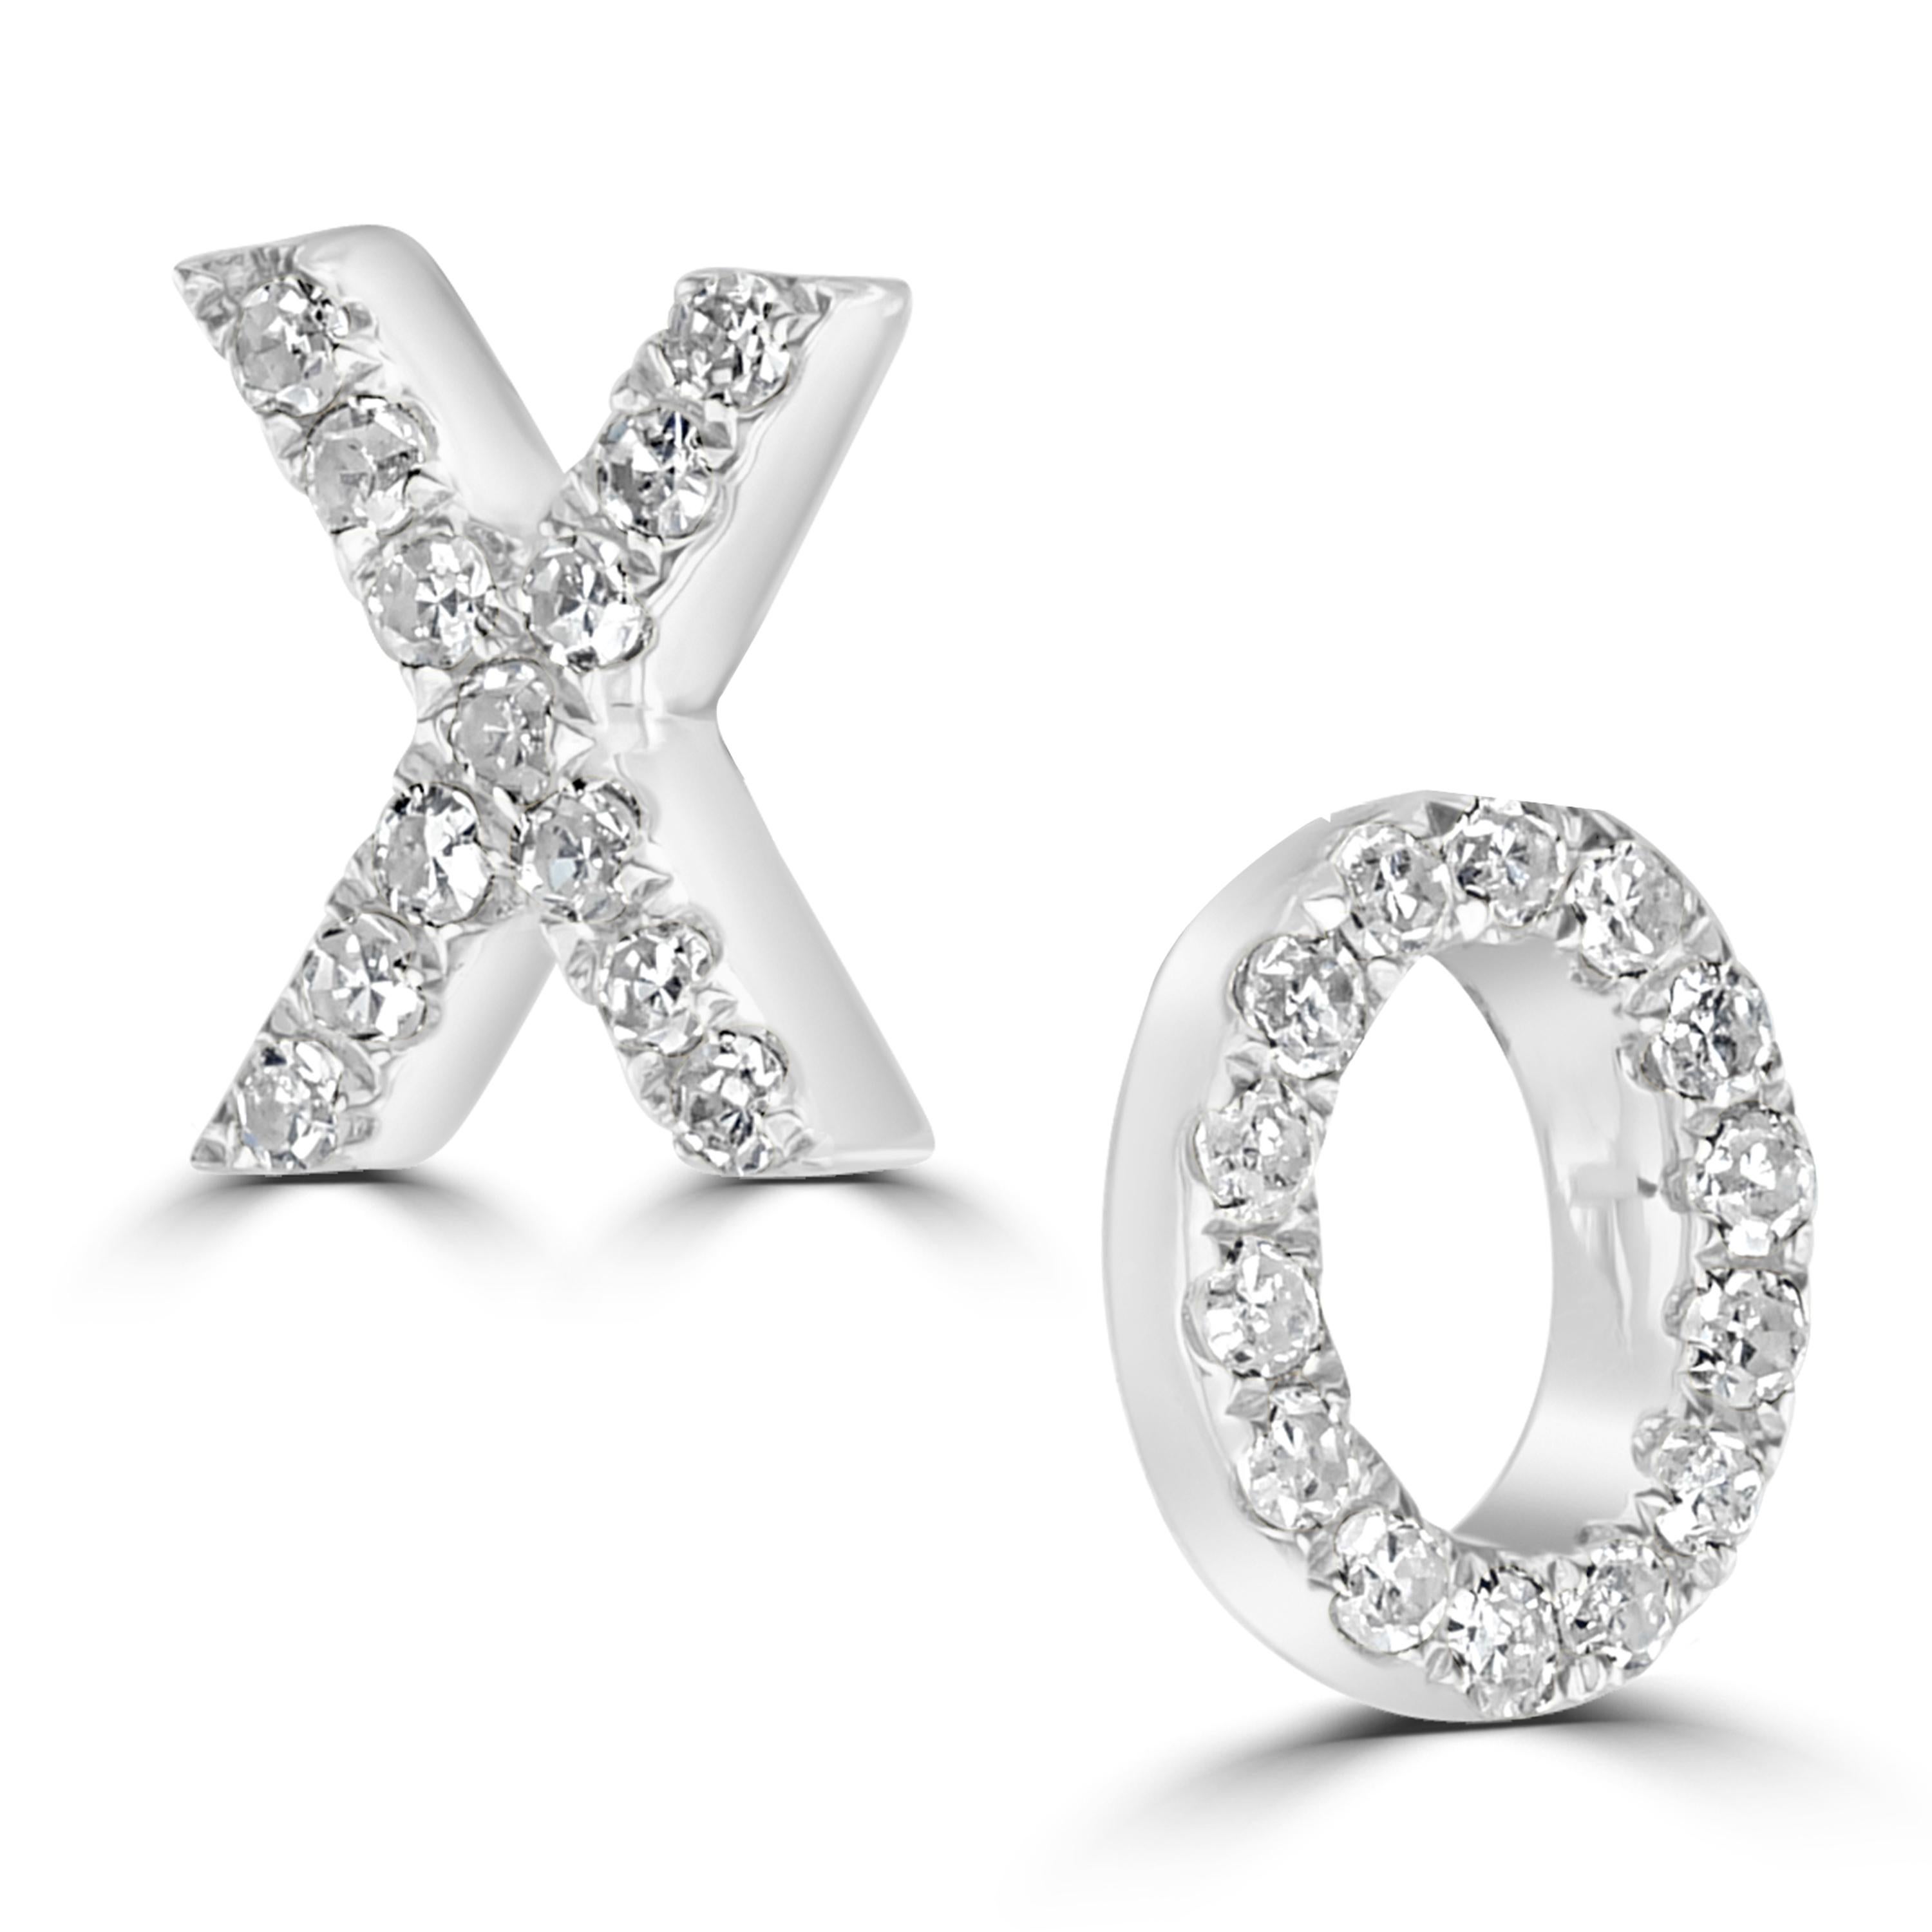 A unique but chic addition to your wardrobe. These fashionable X O studs are studded with 27 round diamonds in pave. They come with gold posts and clutch backs.